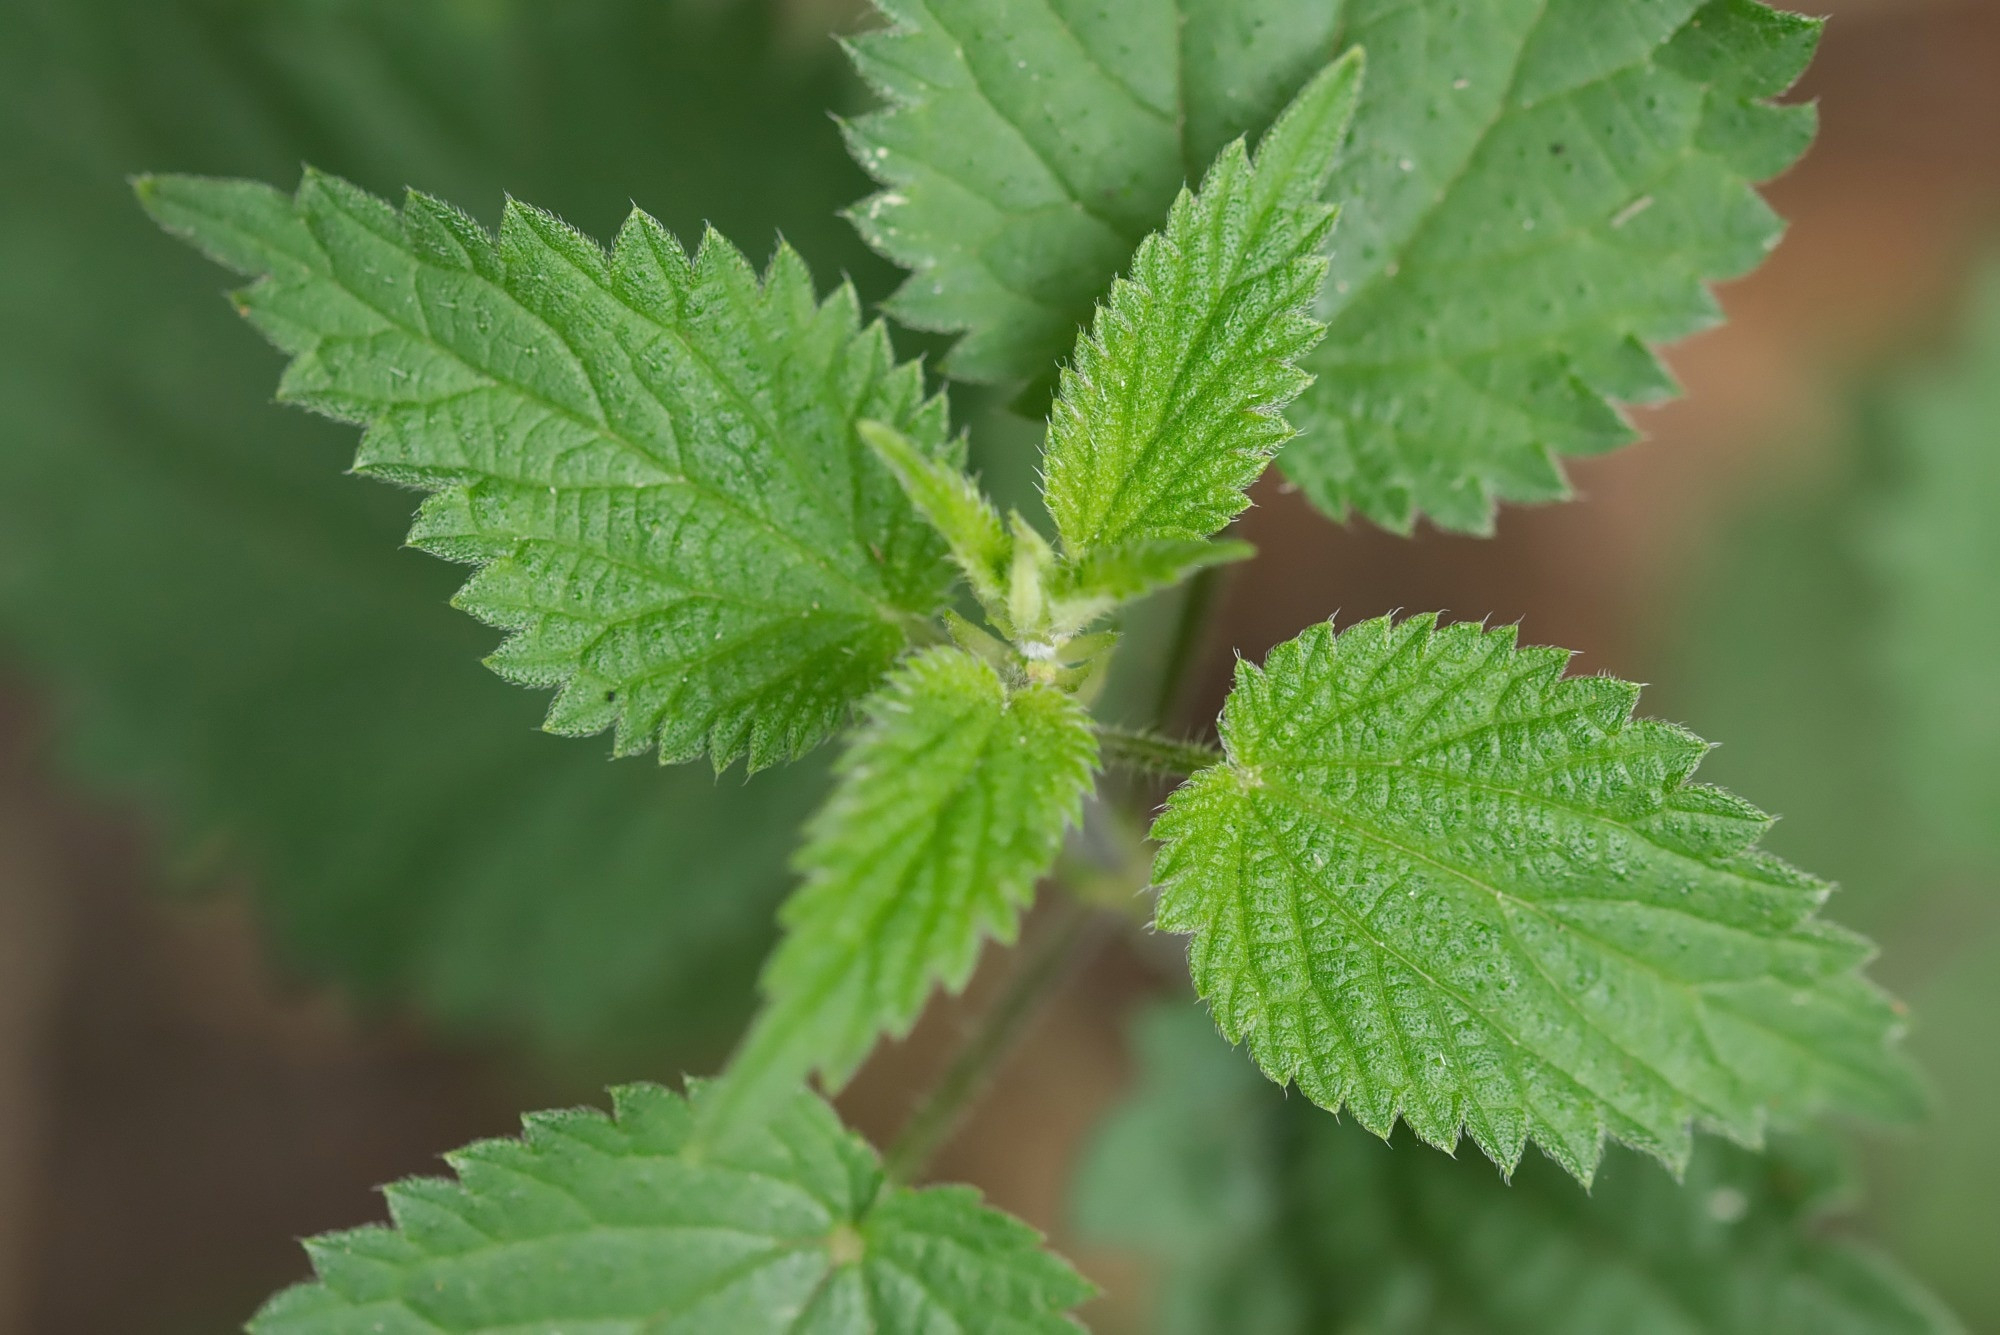 Stinging Nettle Extract Inhibits Sars Cov 2 Cell Fusion